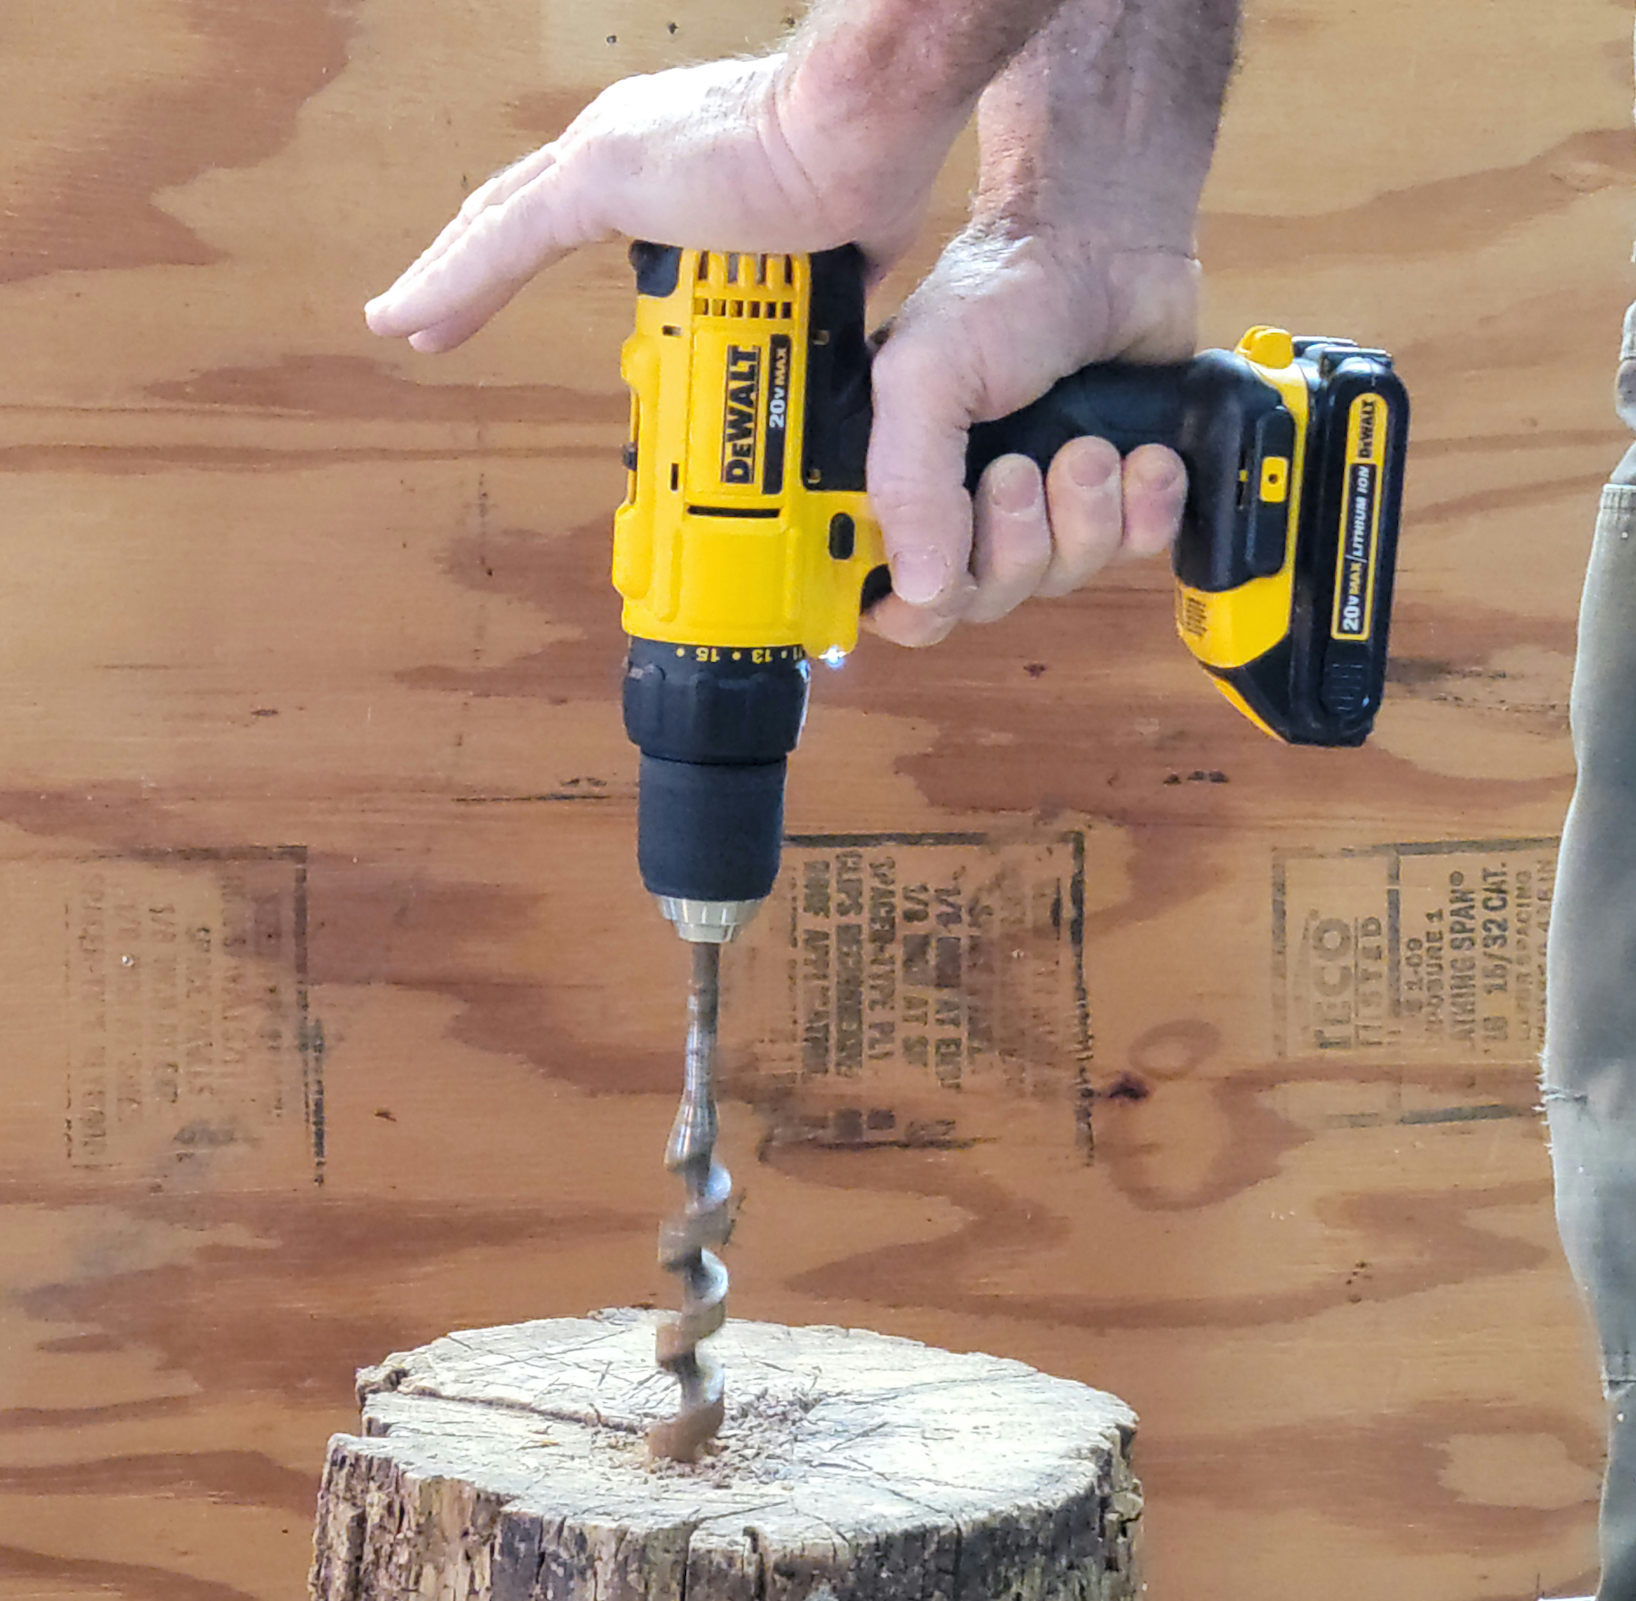 The Best Power Tools and DIY Products Option DeWalt 20V MAX Lithium-Ion Compact Drill Driver Kit